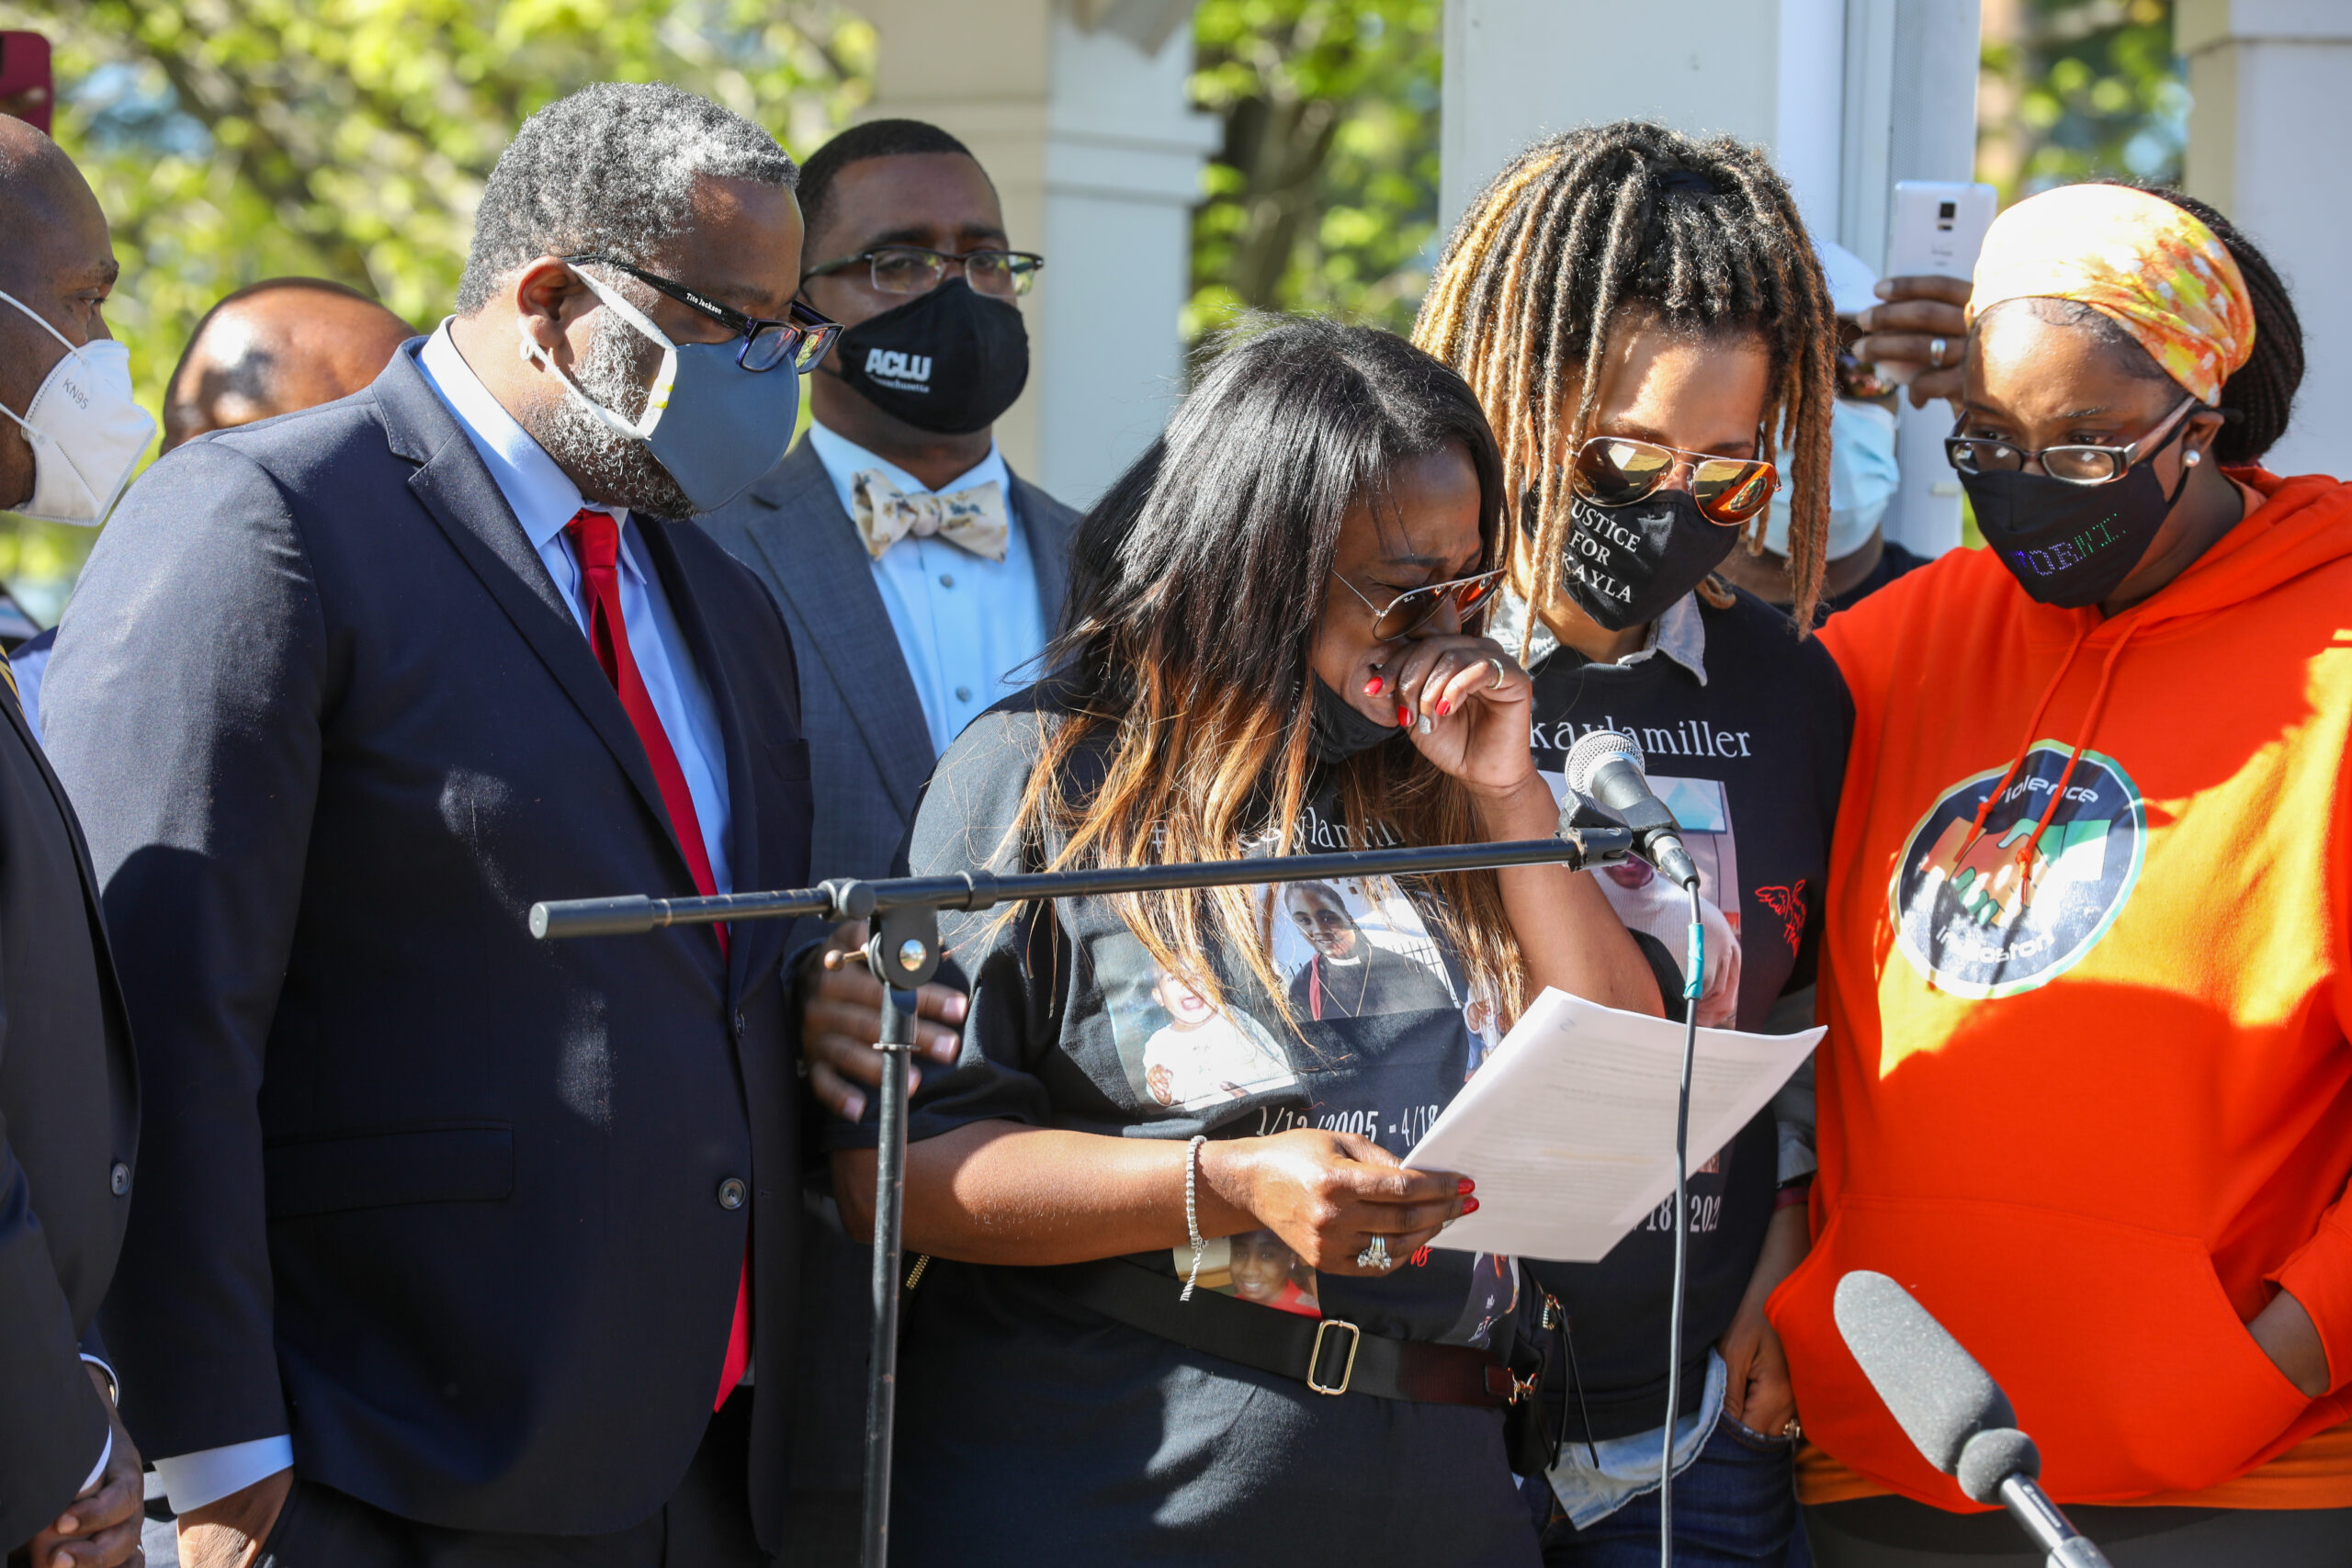 At Town Common rally, Mikayla Miller’s mother eulogizes late teen, calls for ‘full and transparent investigation’